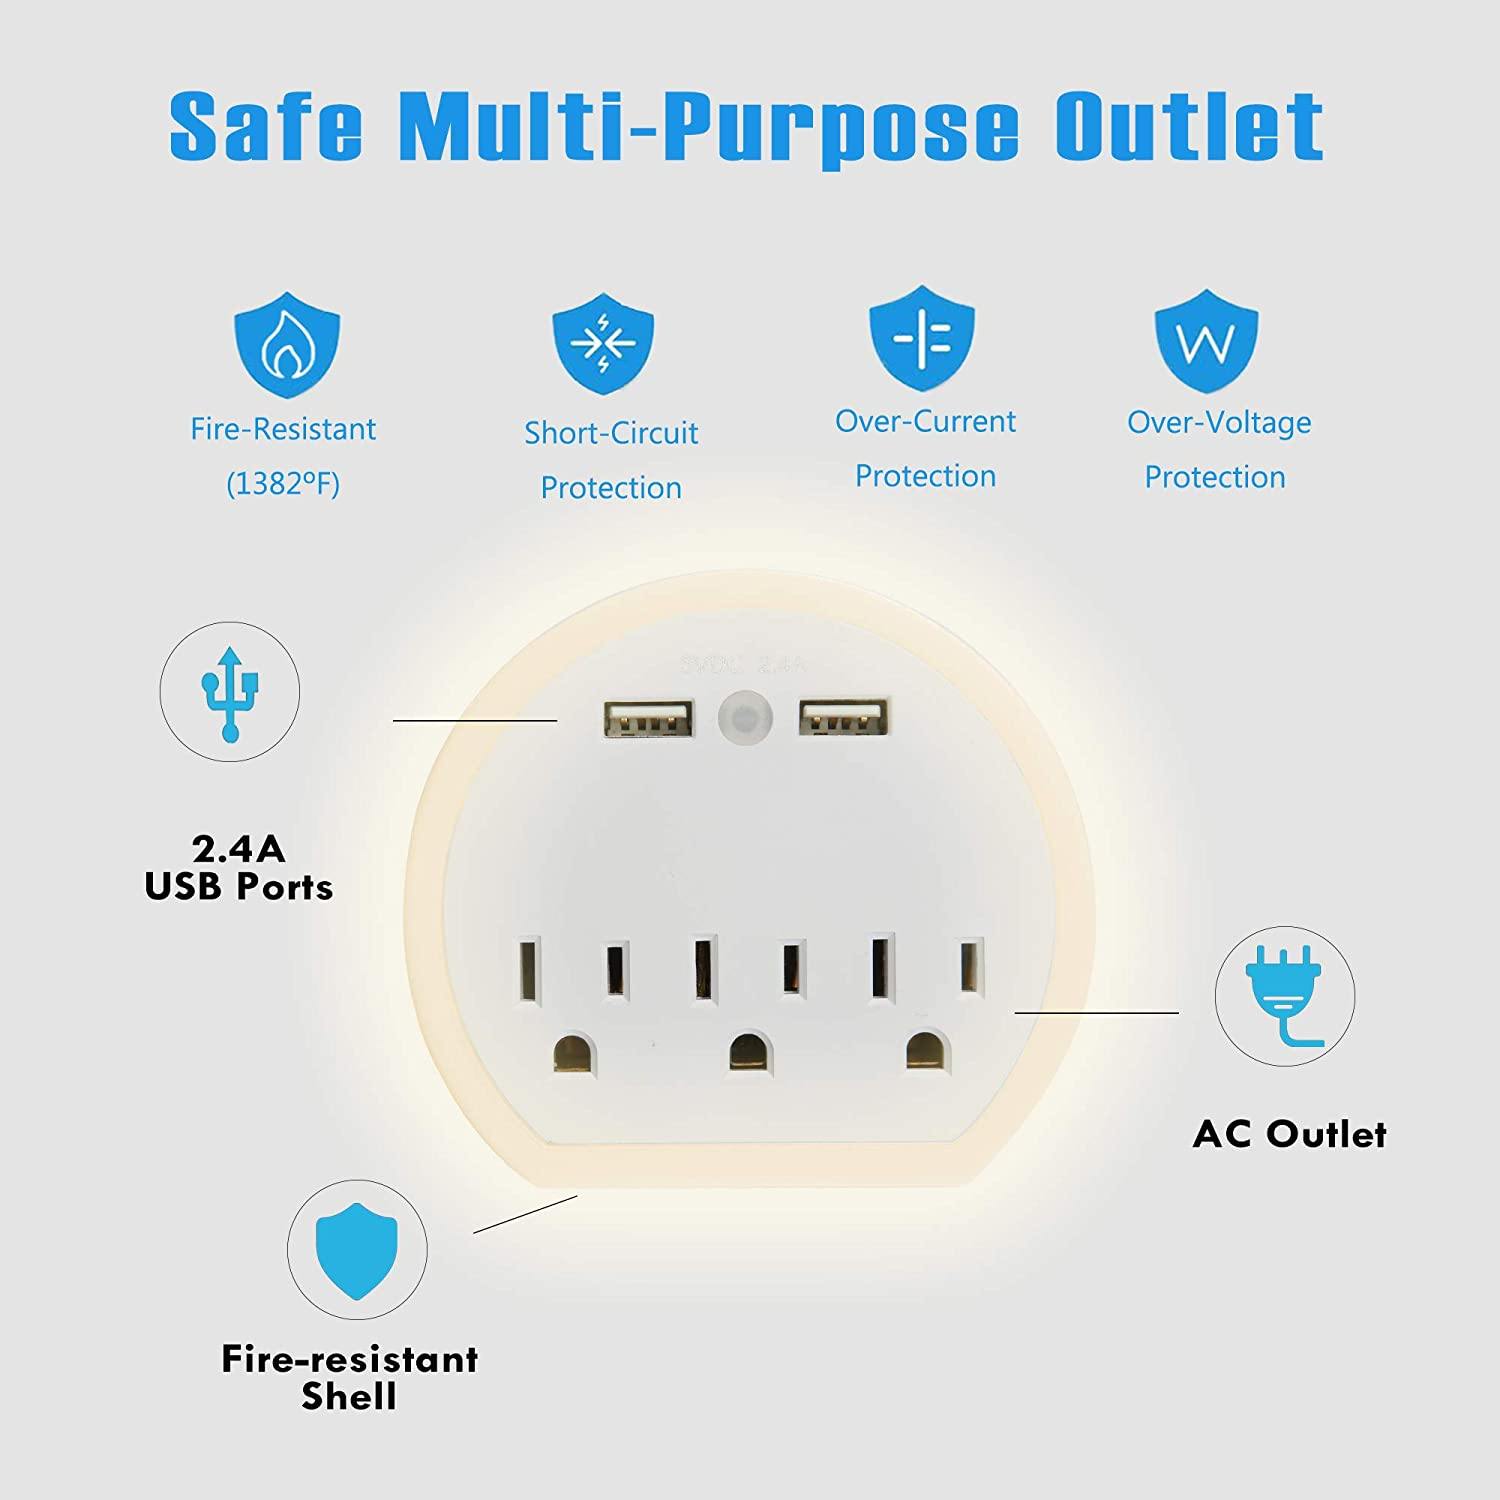 USB Wall Outlet Extender, Surge Protector Wall Outlet Plug with 3 Outlet and 2 USB Port(5V/2.4A) - Bosonshop